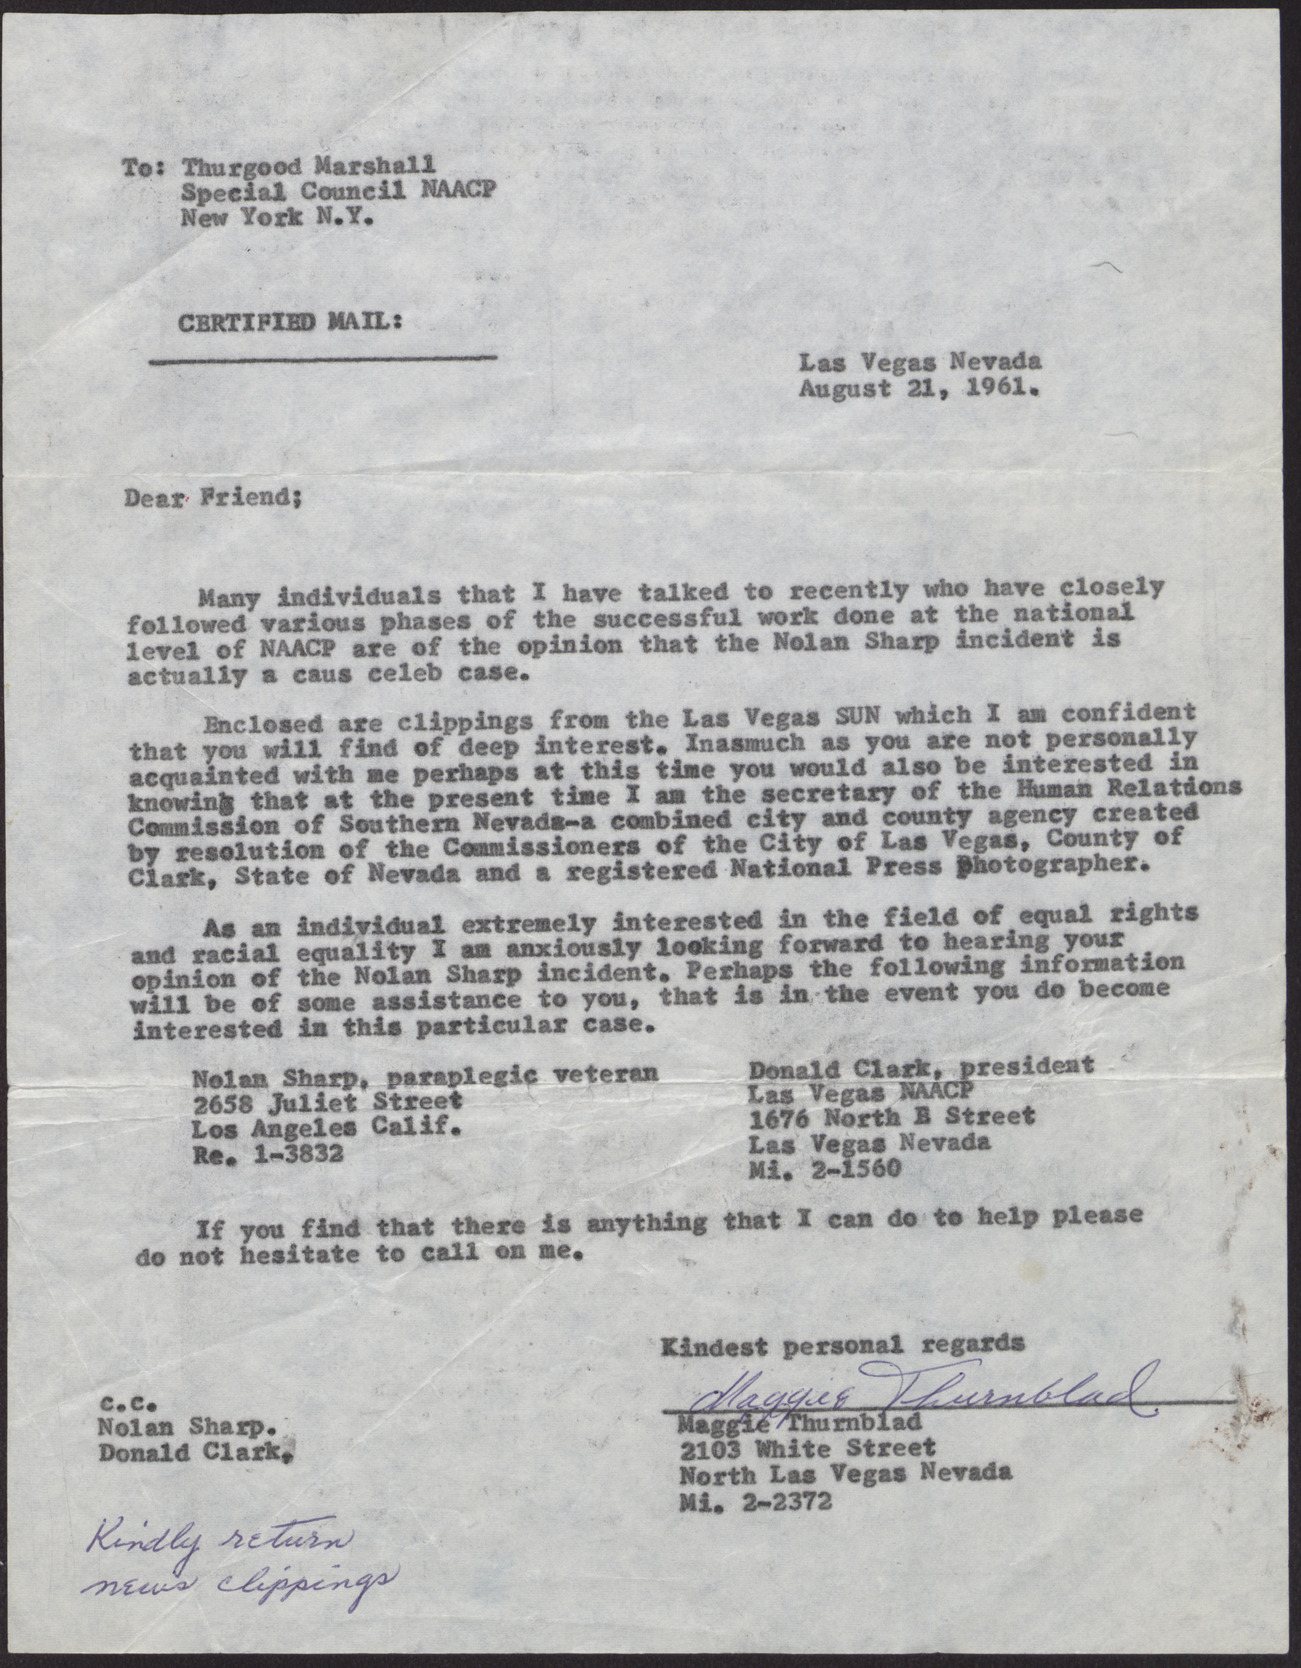 Letter to Thurgood Marshall from Maggie Thurnblad, August 21, 1961